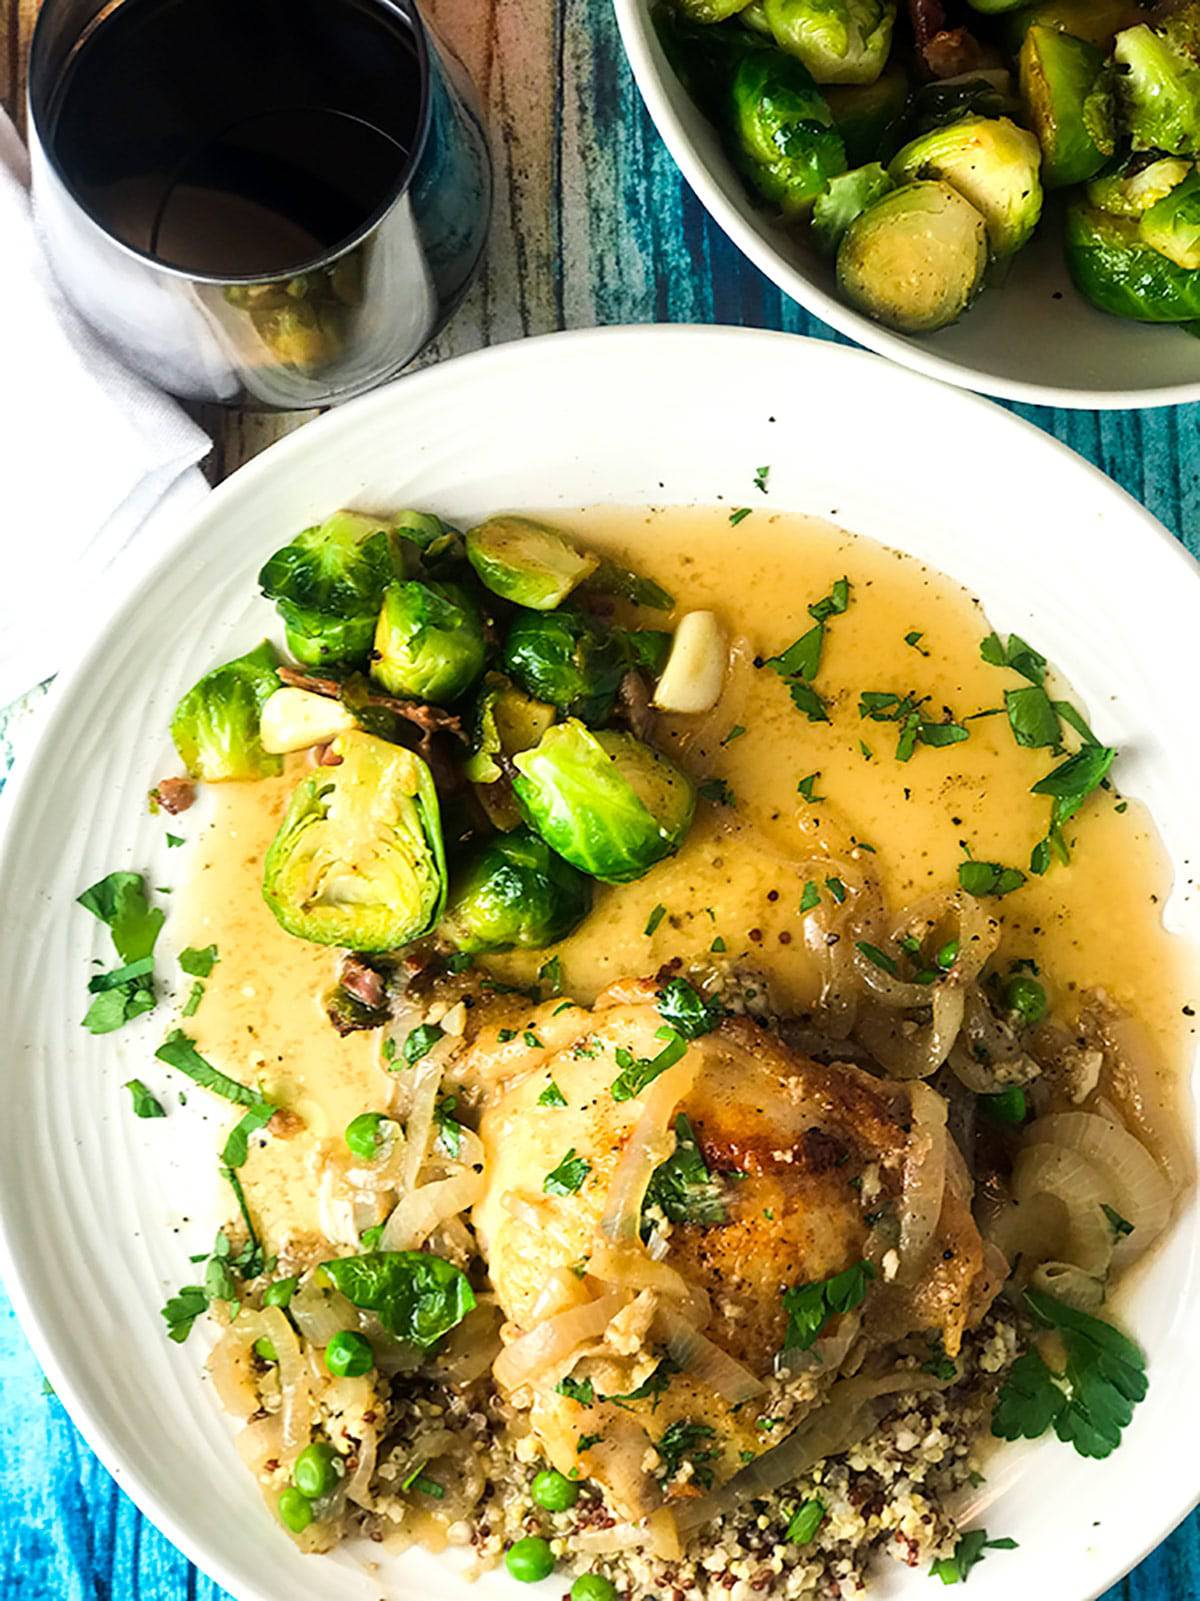 Plate of whiskey chicken in broth with Brussels sprouts.